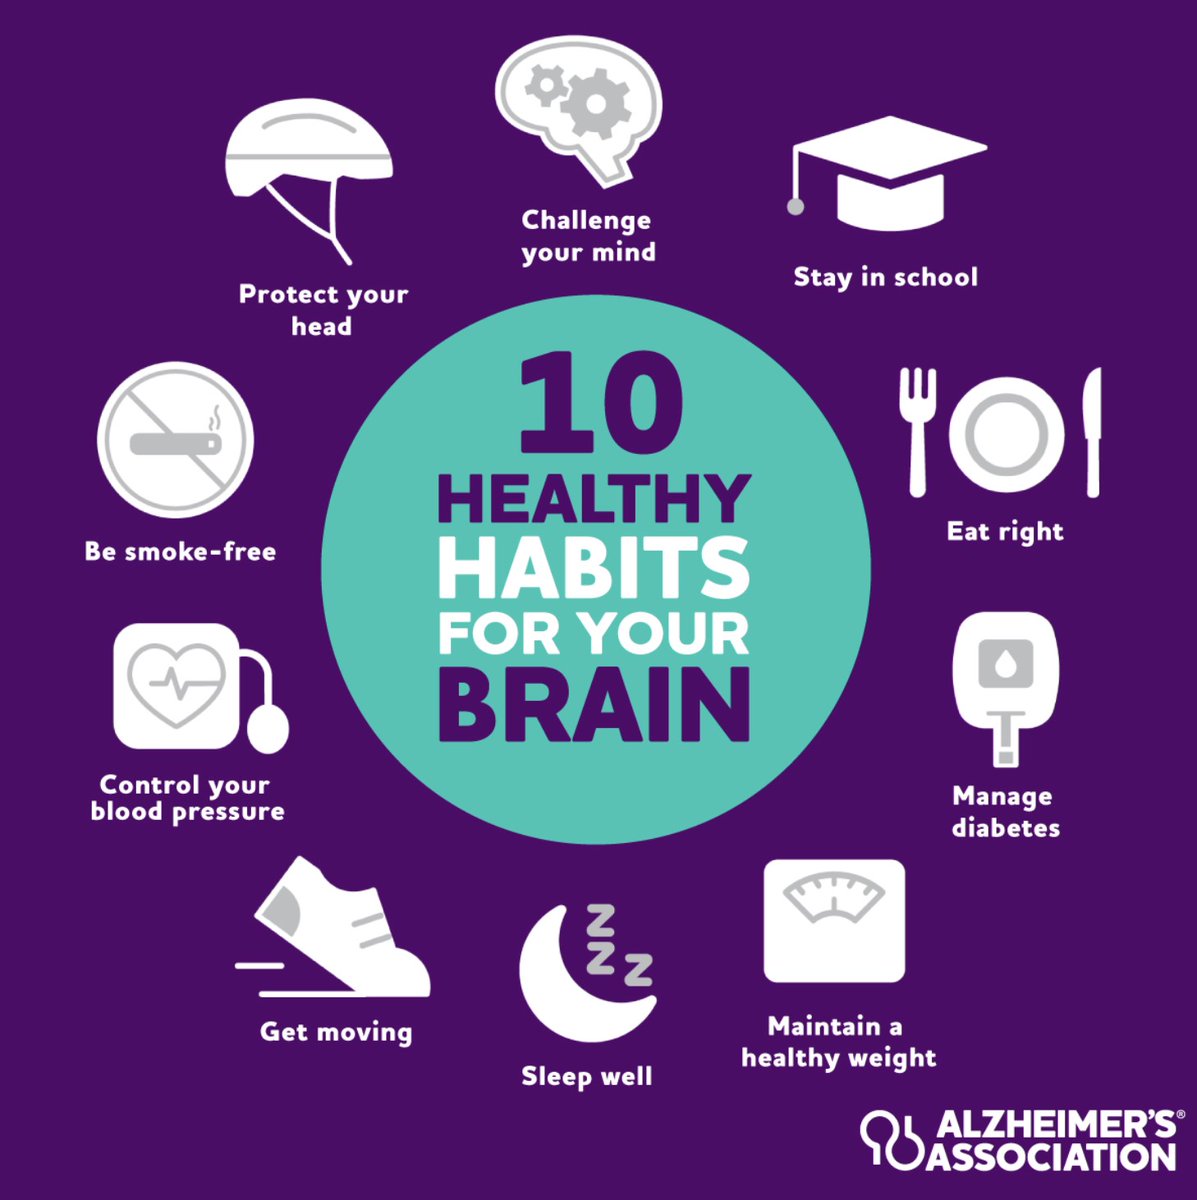 Take charge of your brain health! 🧠 These healthy habits can lower the risk of developing cognitive decline and dementia: alz.org/healthyhabits.